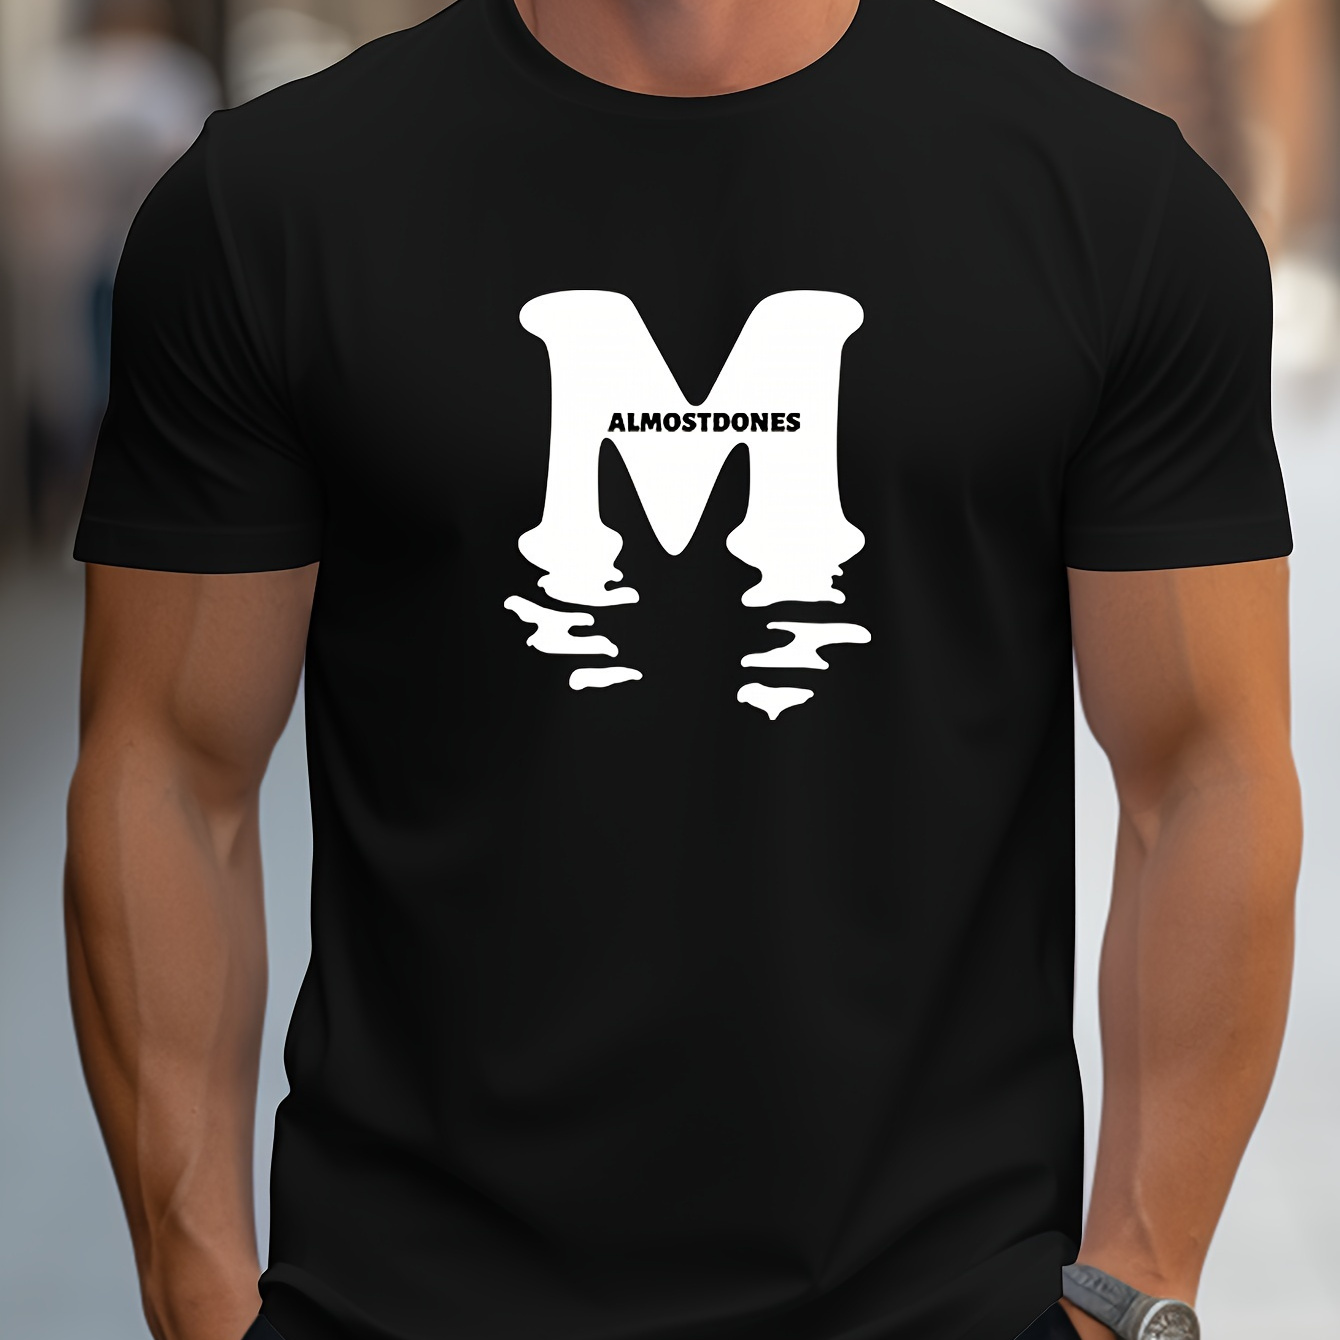 

M And Reflection Graphic Print, Men's Novel Graphic Design T-shirt, Casual Comfy Tees For Summer, Men's Clothing Tops For Daily Activities